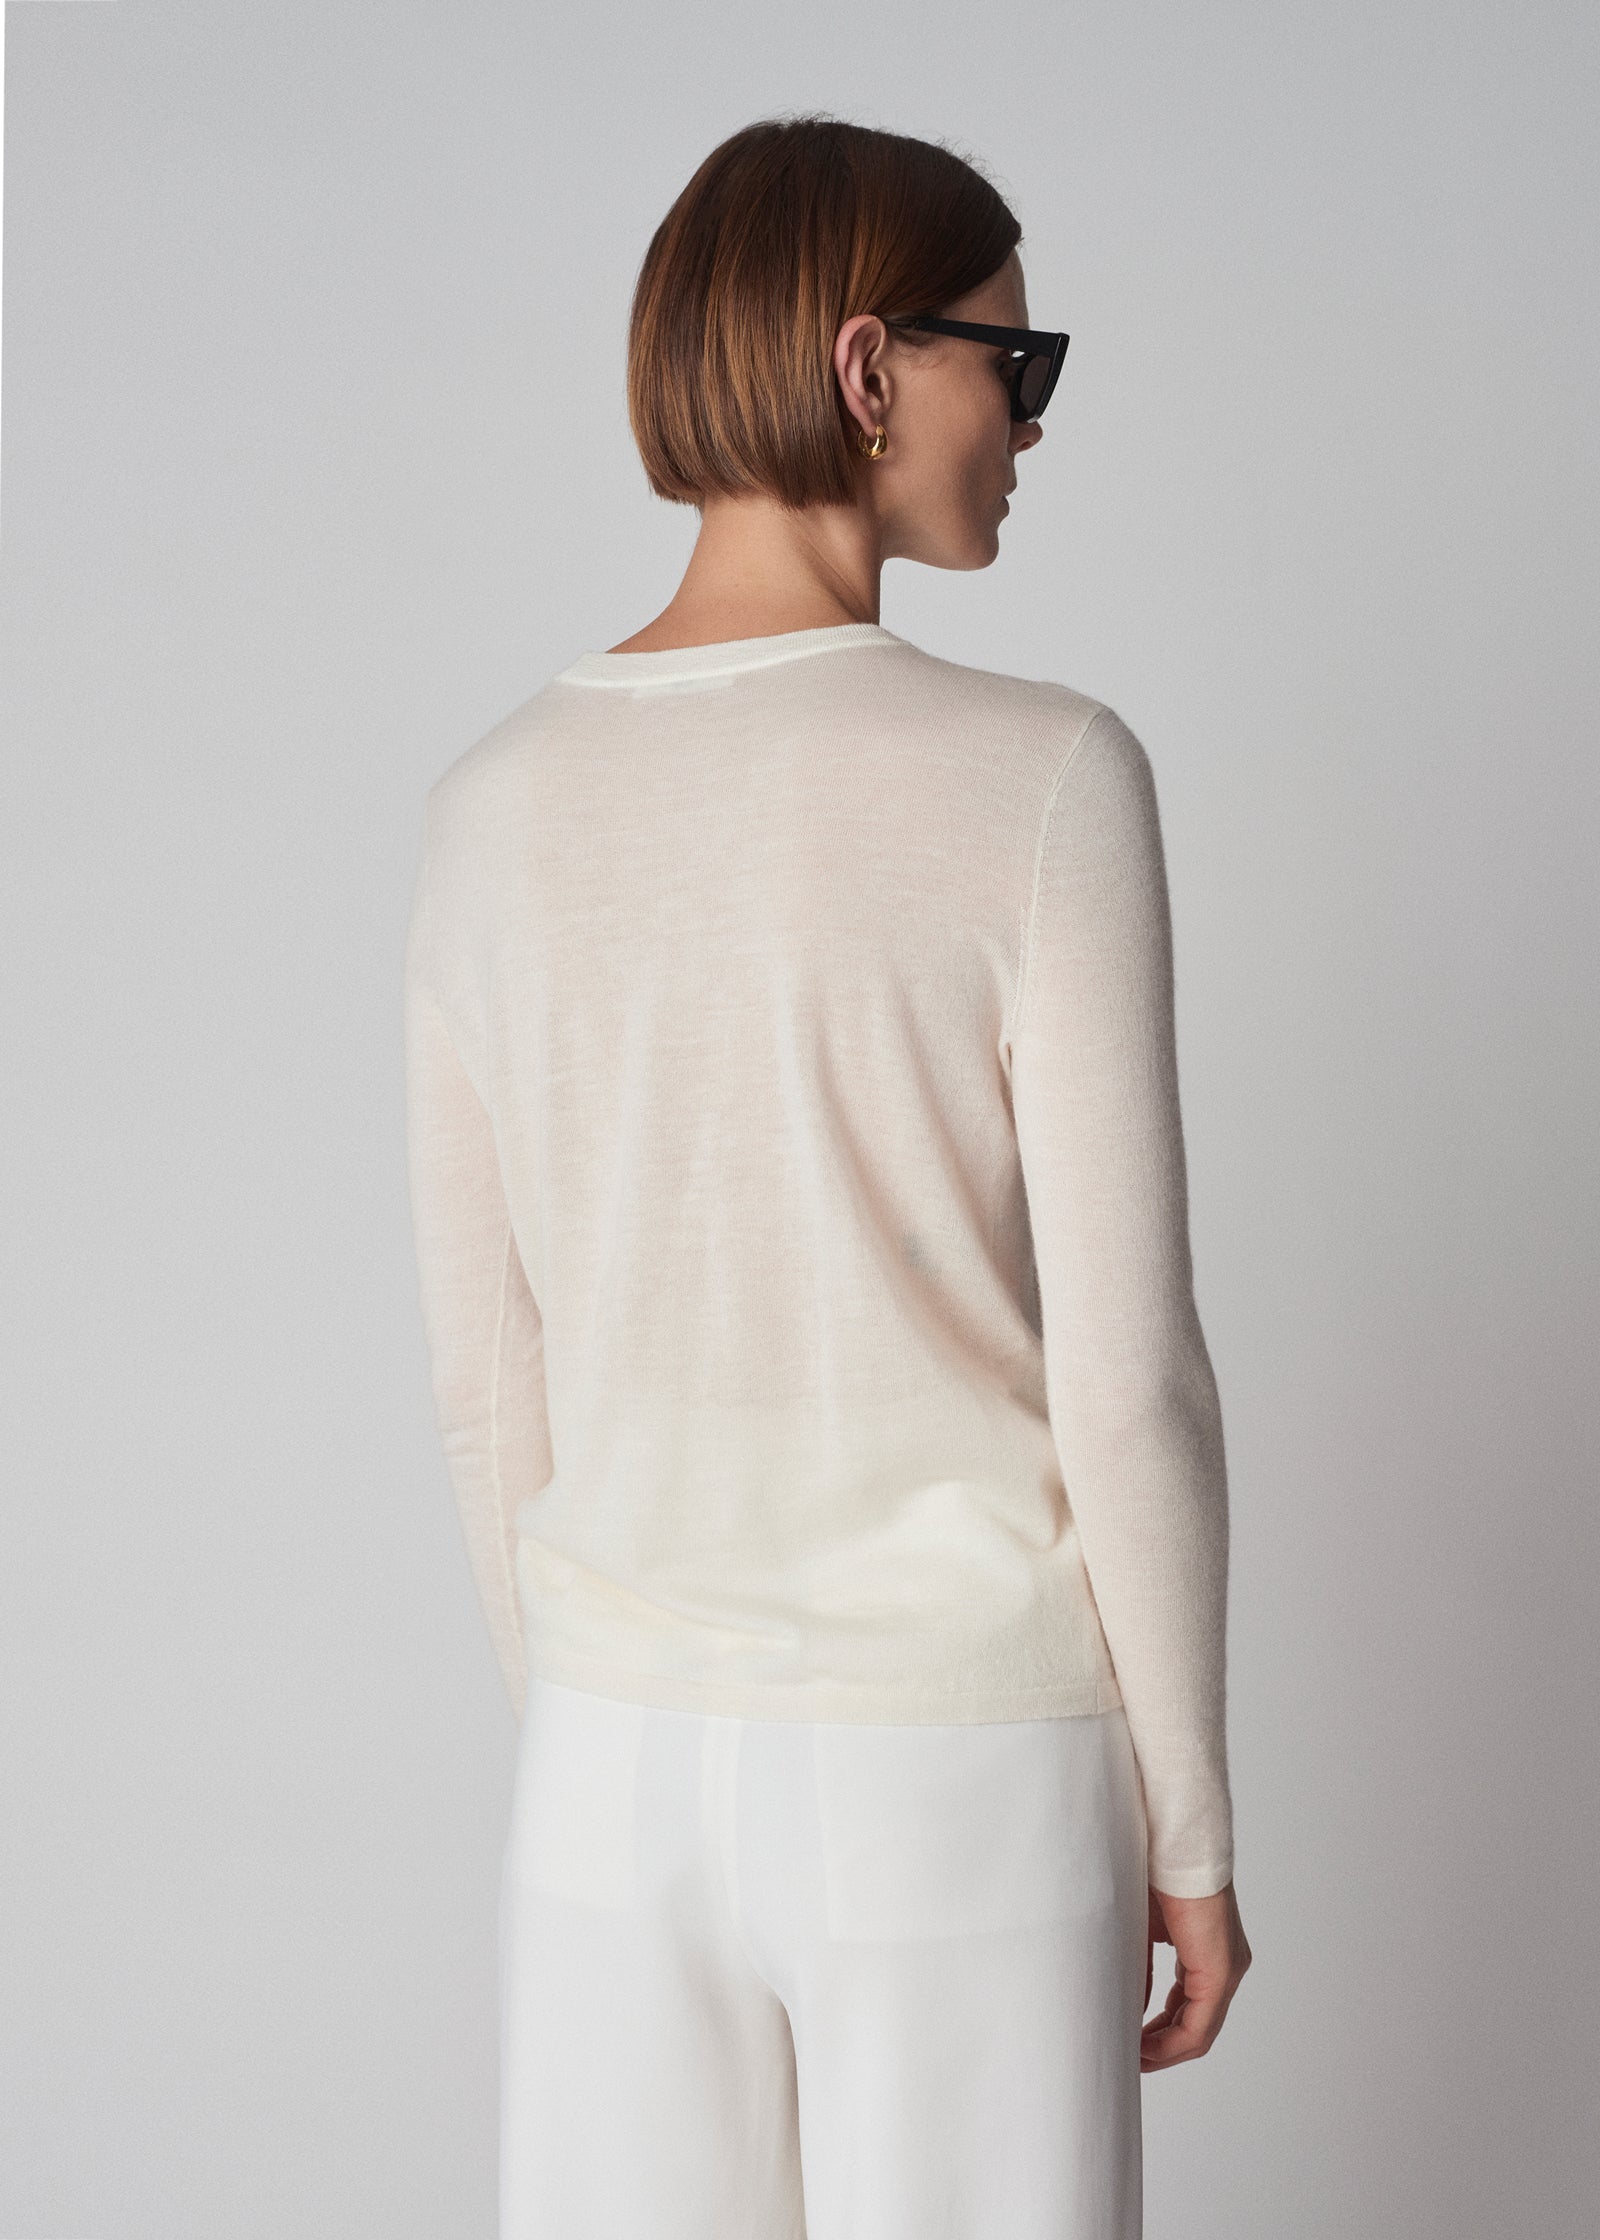 Long Sleeve Crew Neck Tee in Fine Cashmere - Ivory - CO Collections